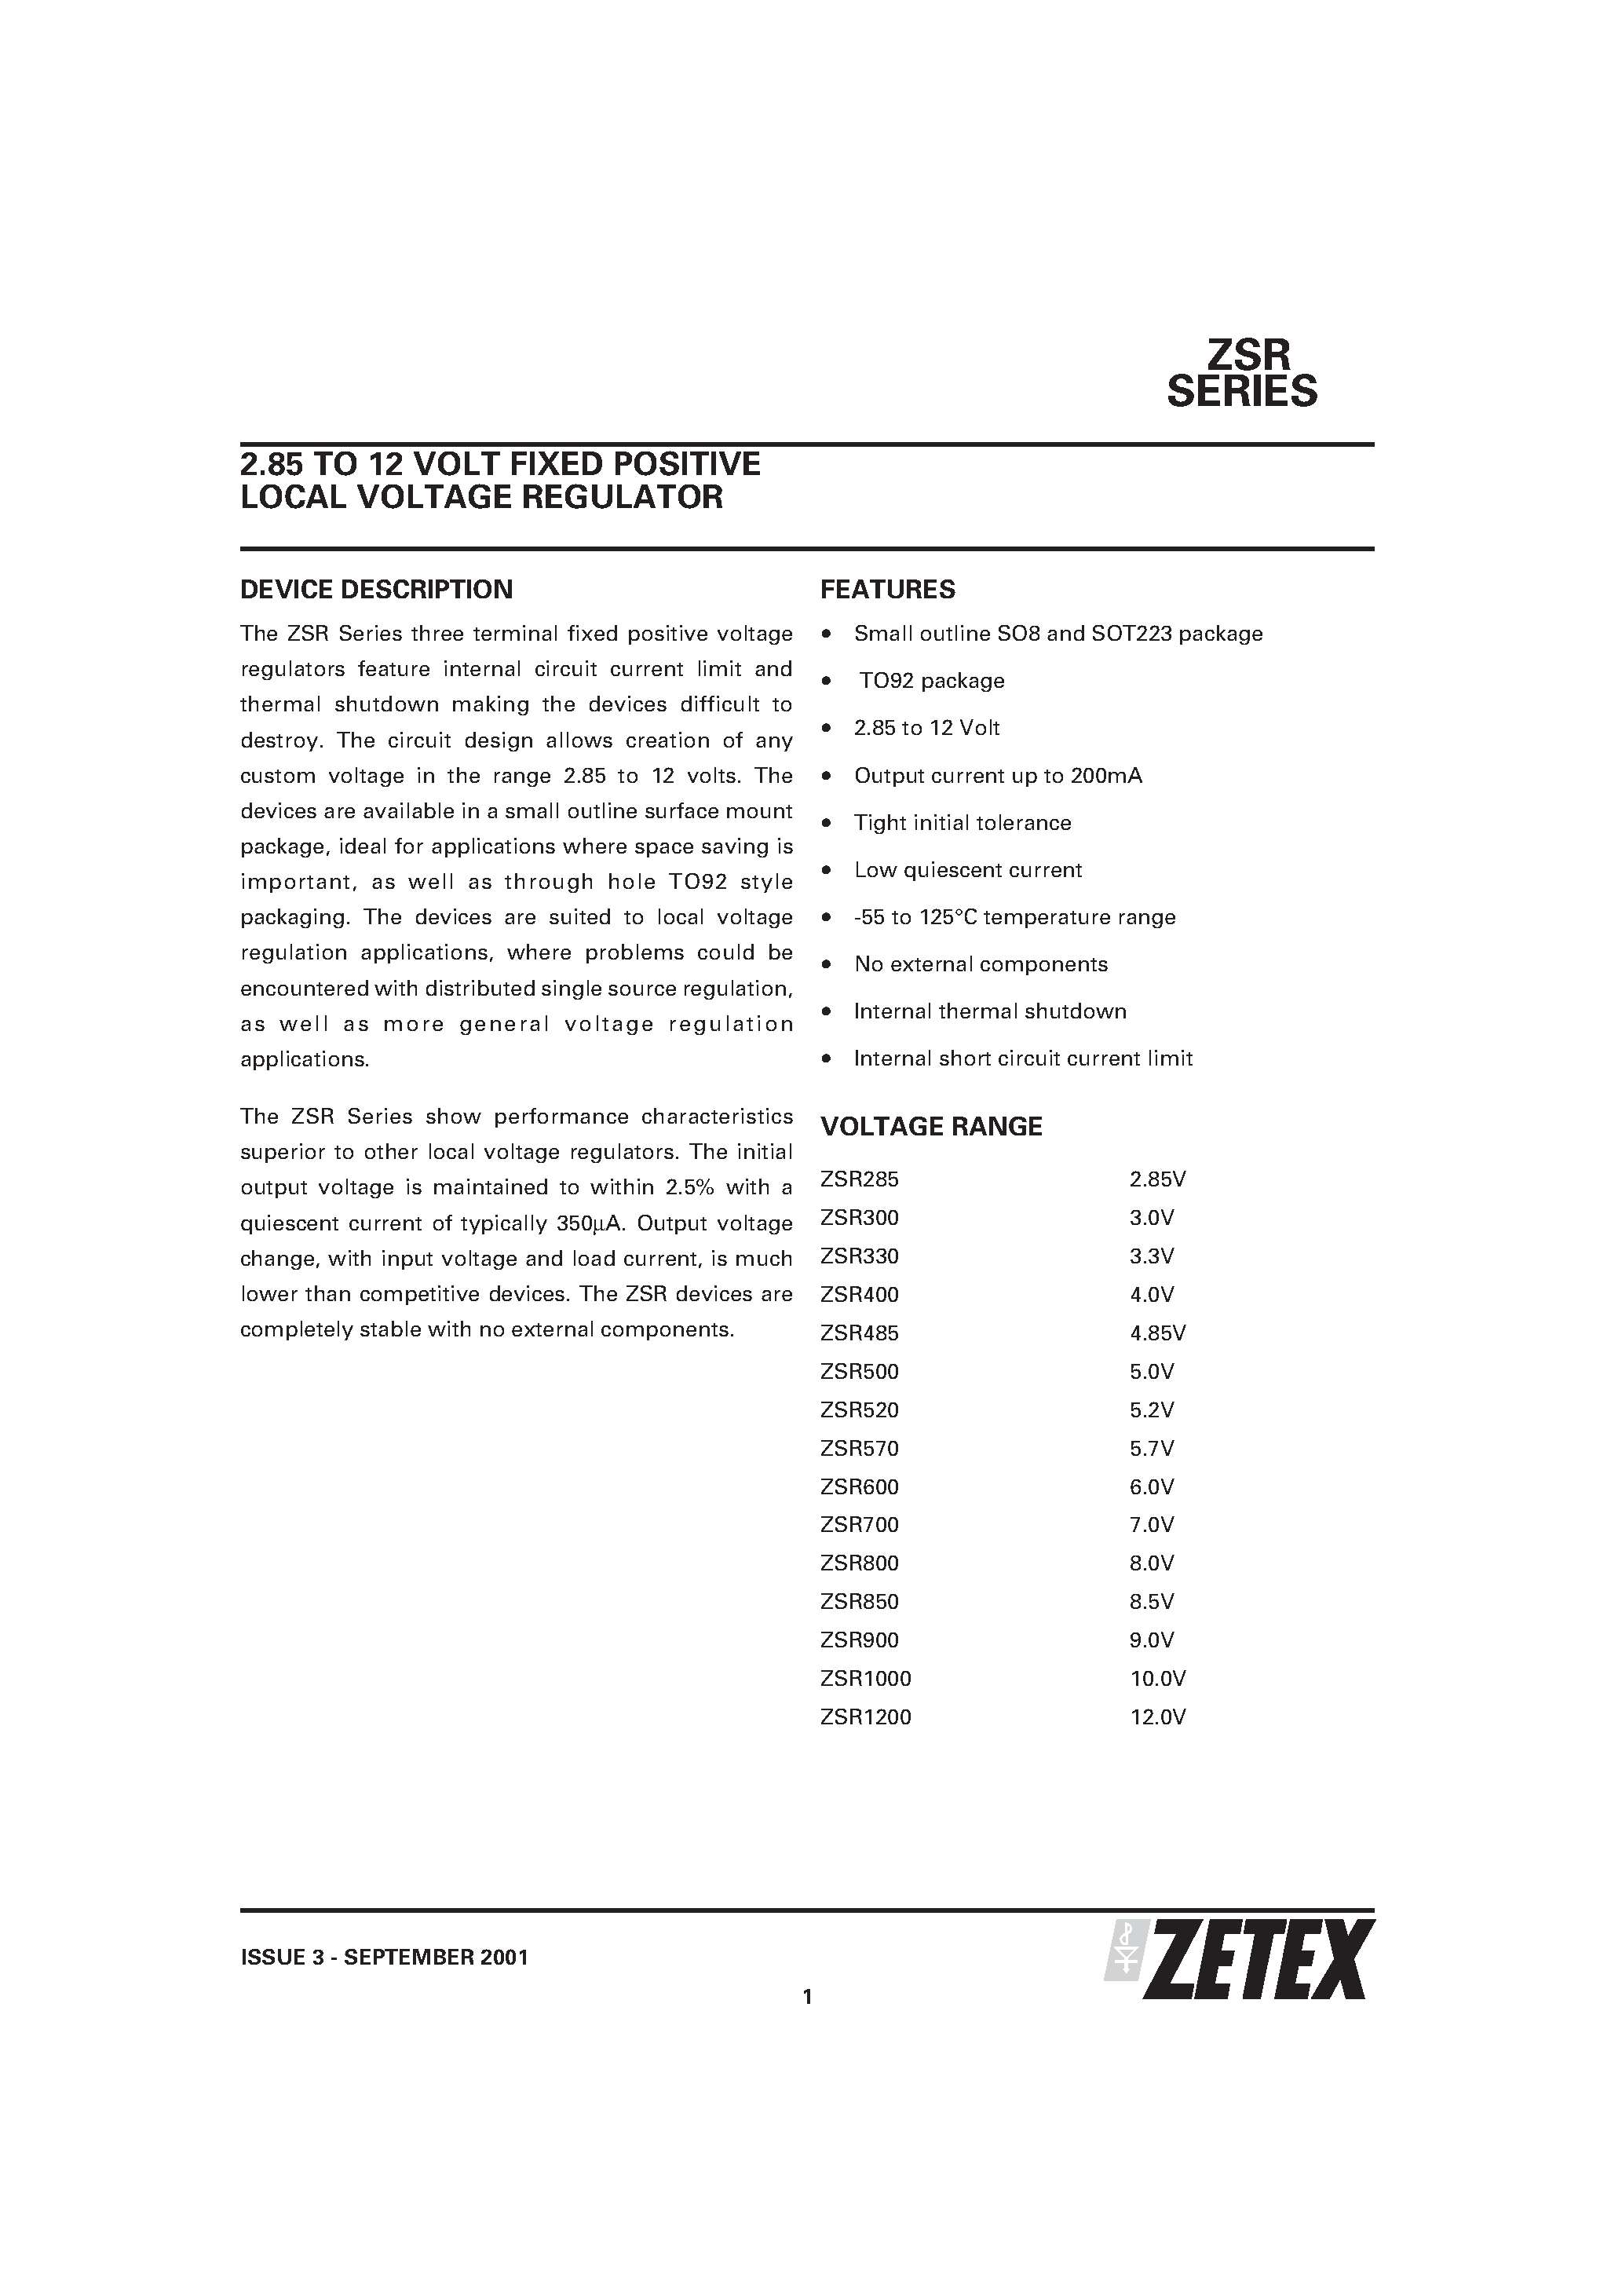 Datasheet ZSR485C - 2.85 TO 12 VOLT FIXED POSITIVE LOCAL VOLTAGE REGULATOR page 1